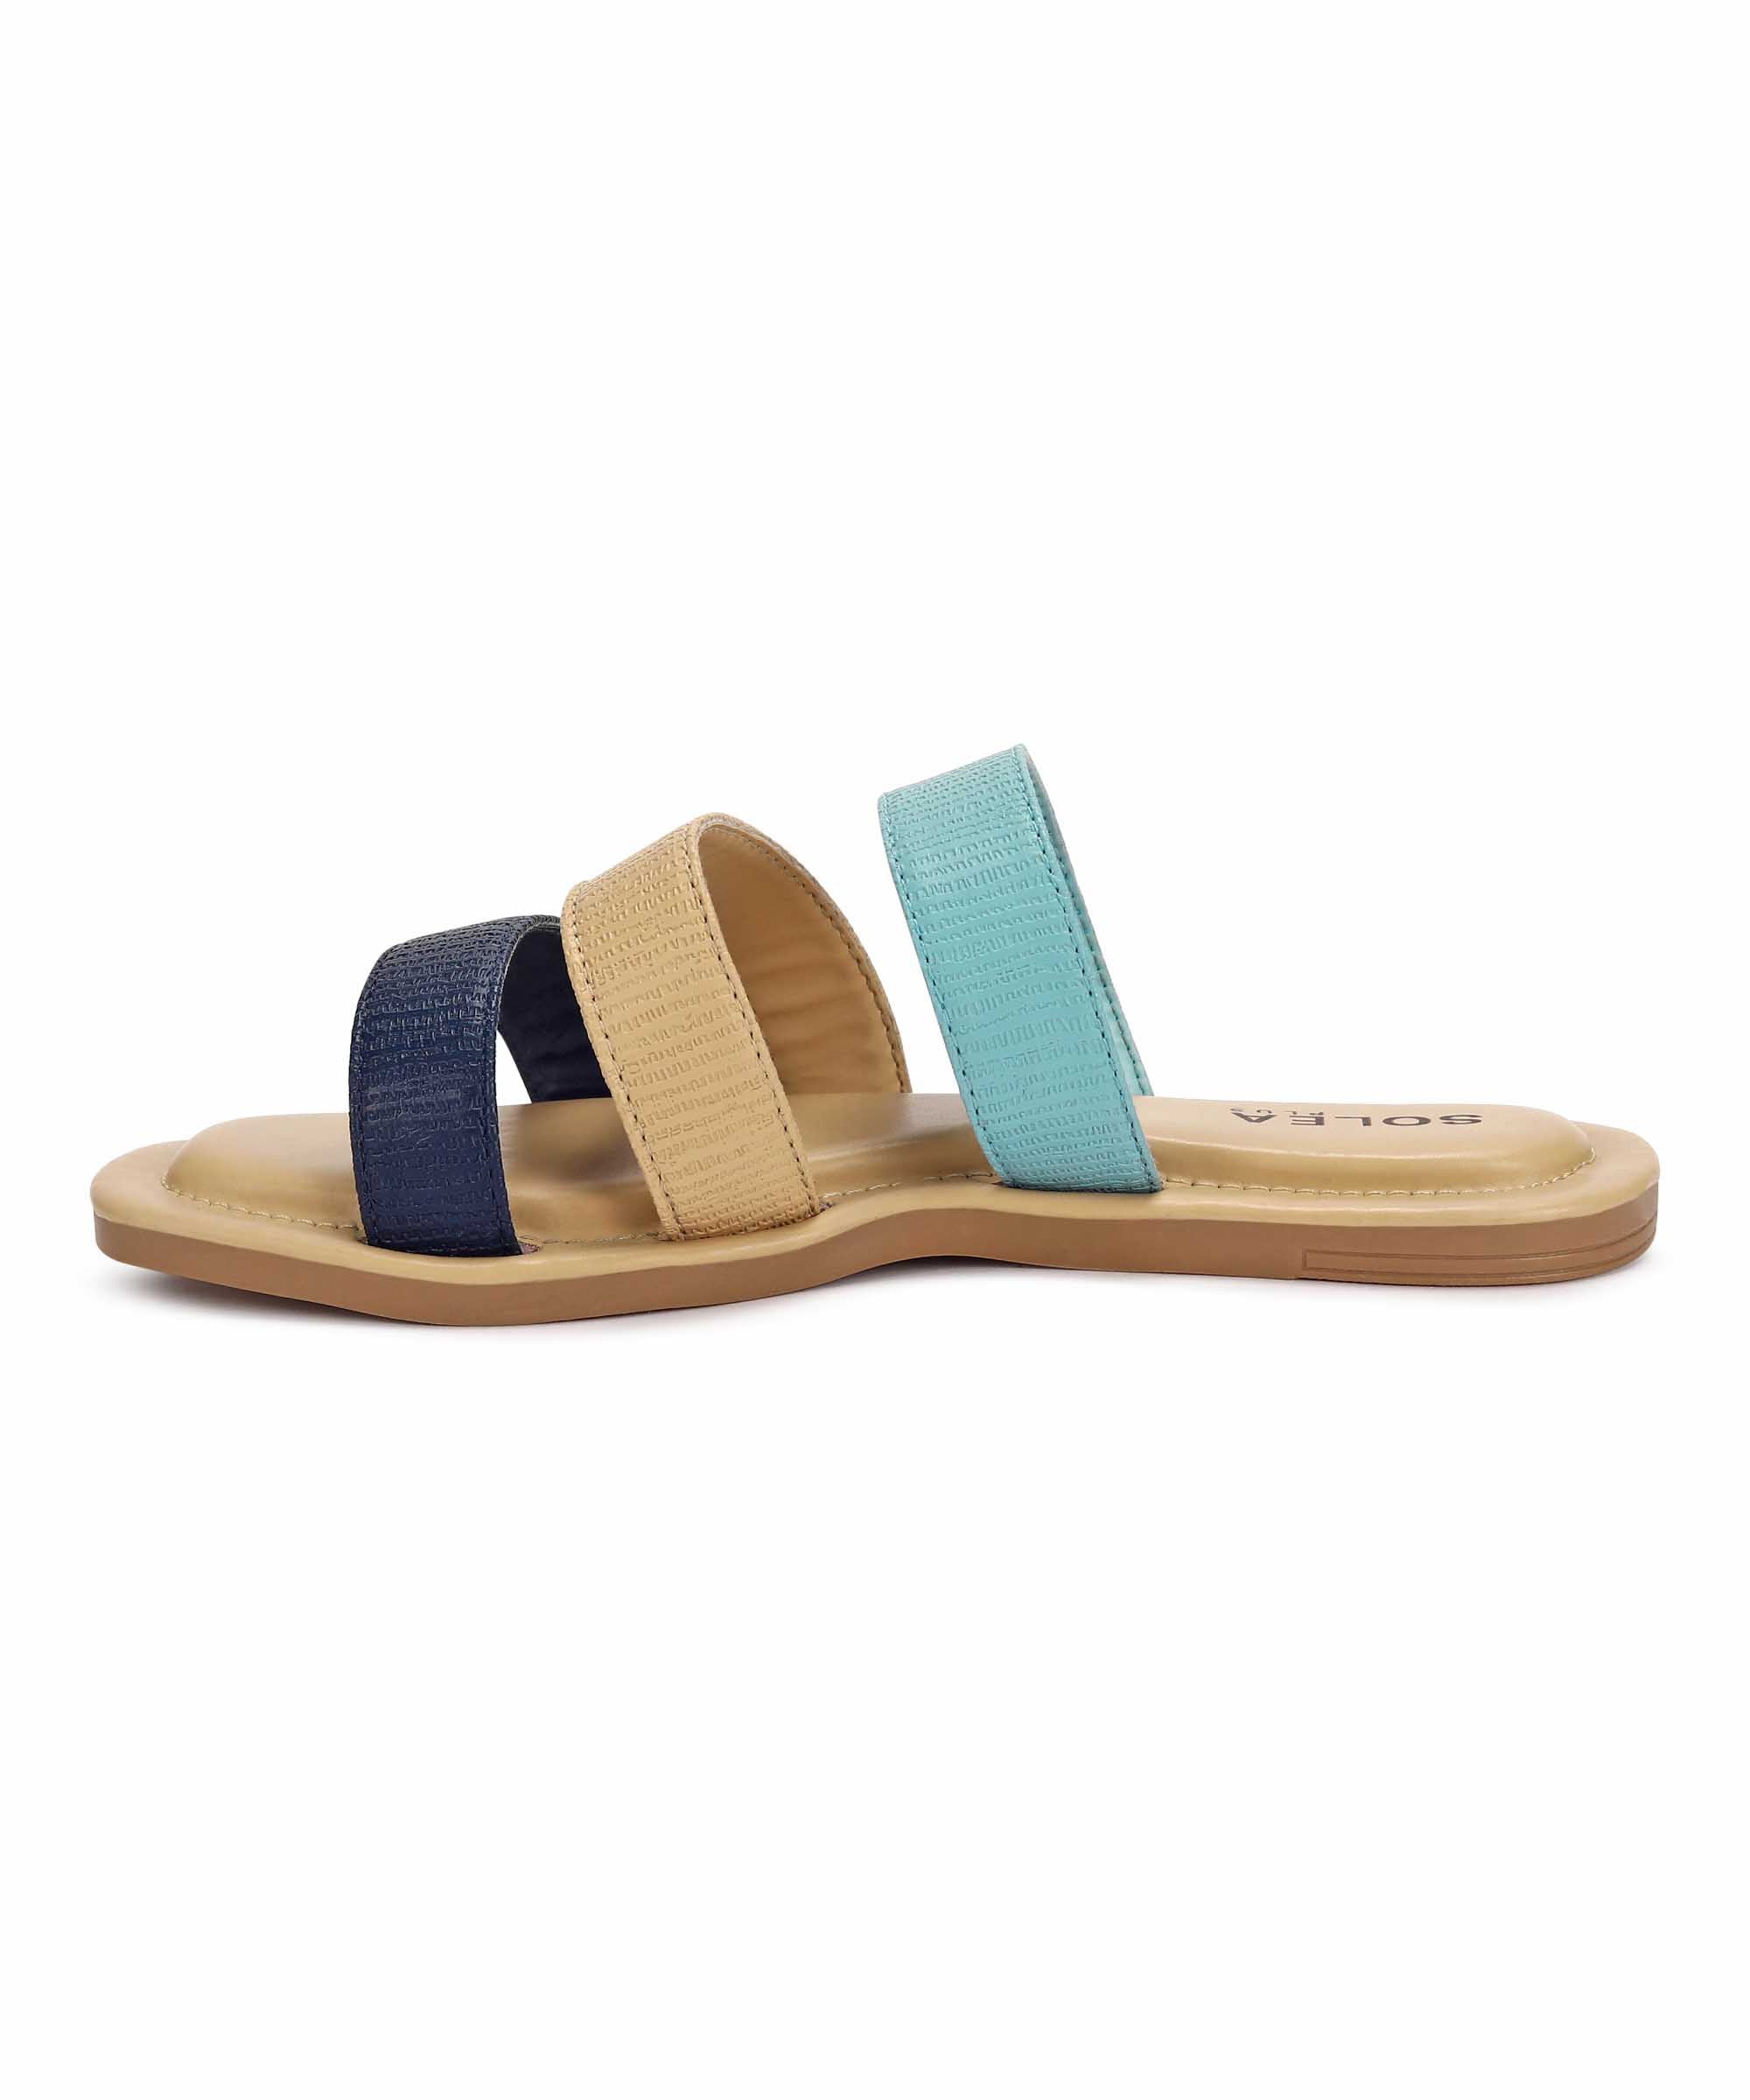 Paragon K6019L Women Sandals | Casual &amp; Formal Sandals | Stylish, Comfortable &amp; Durable | For Daily &amp; Occasion Wear